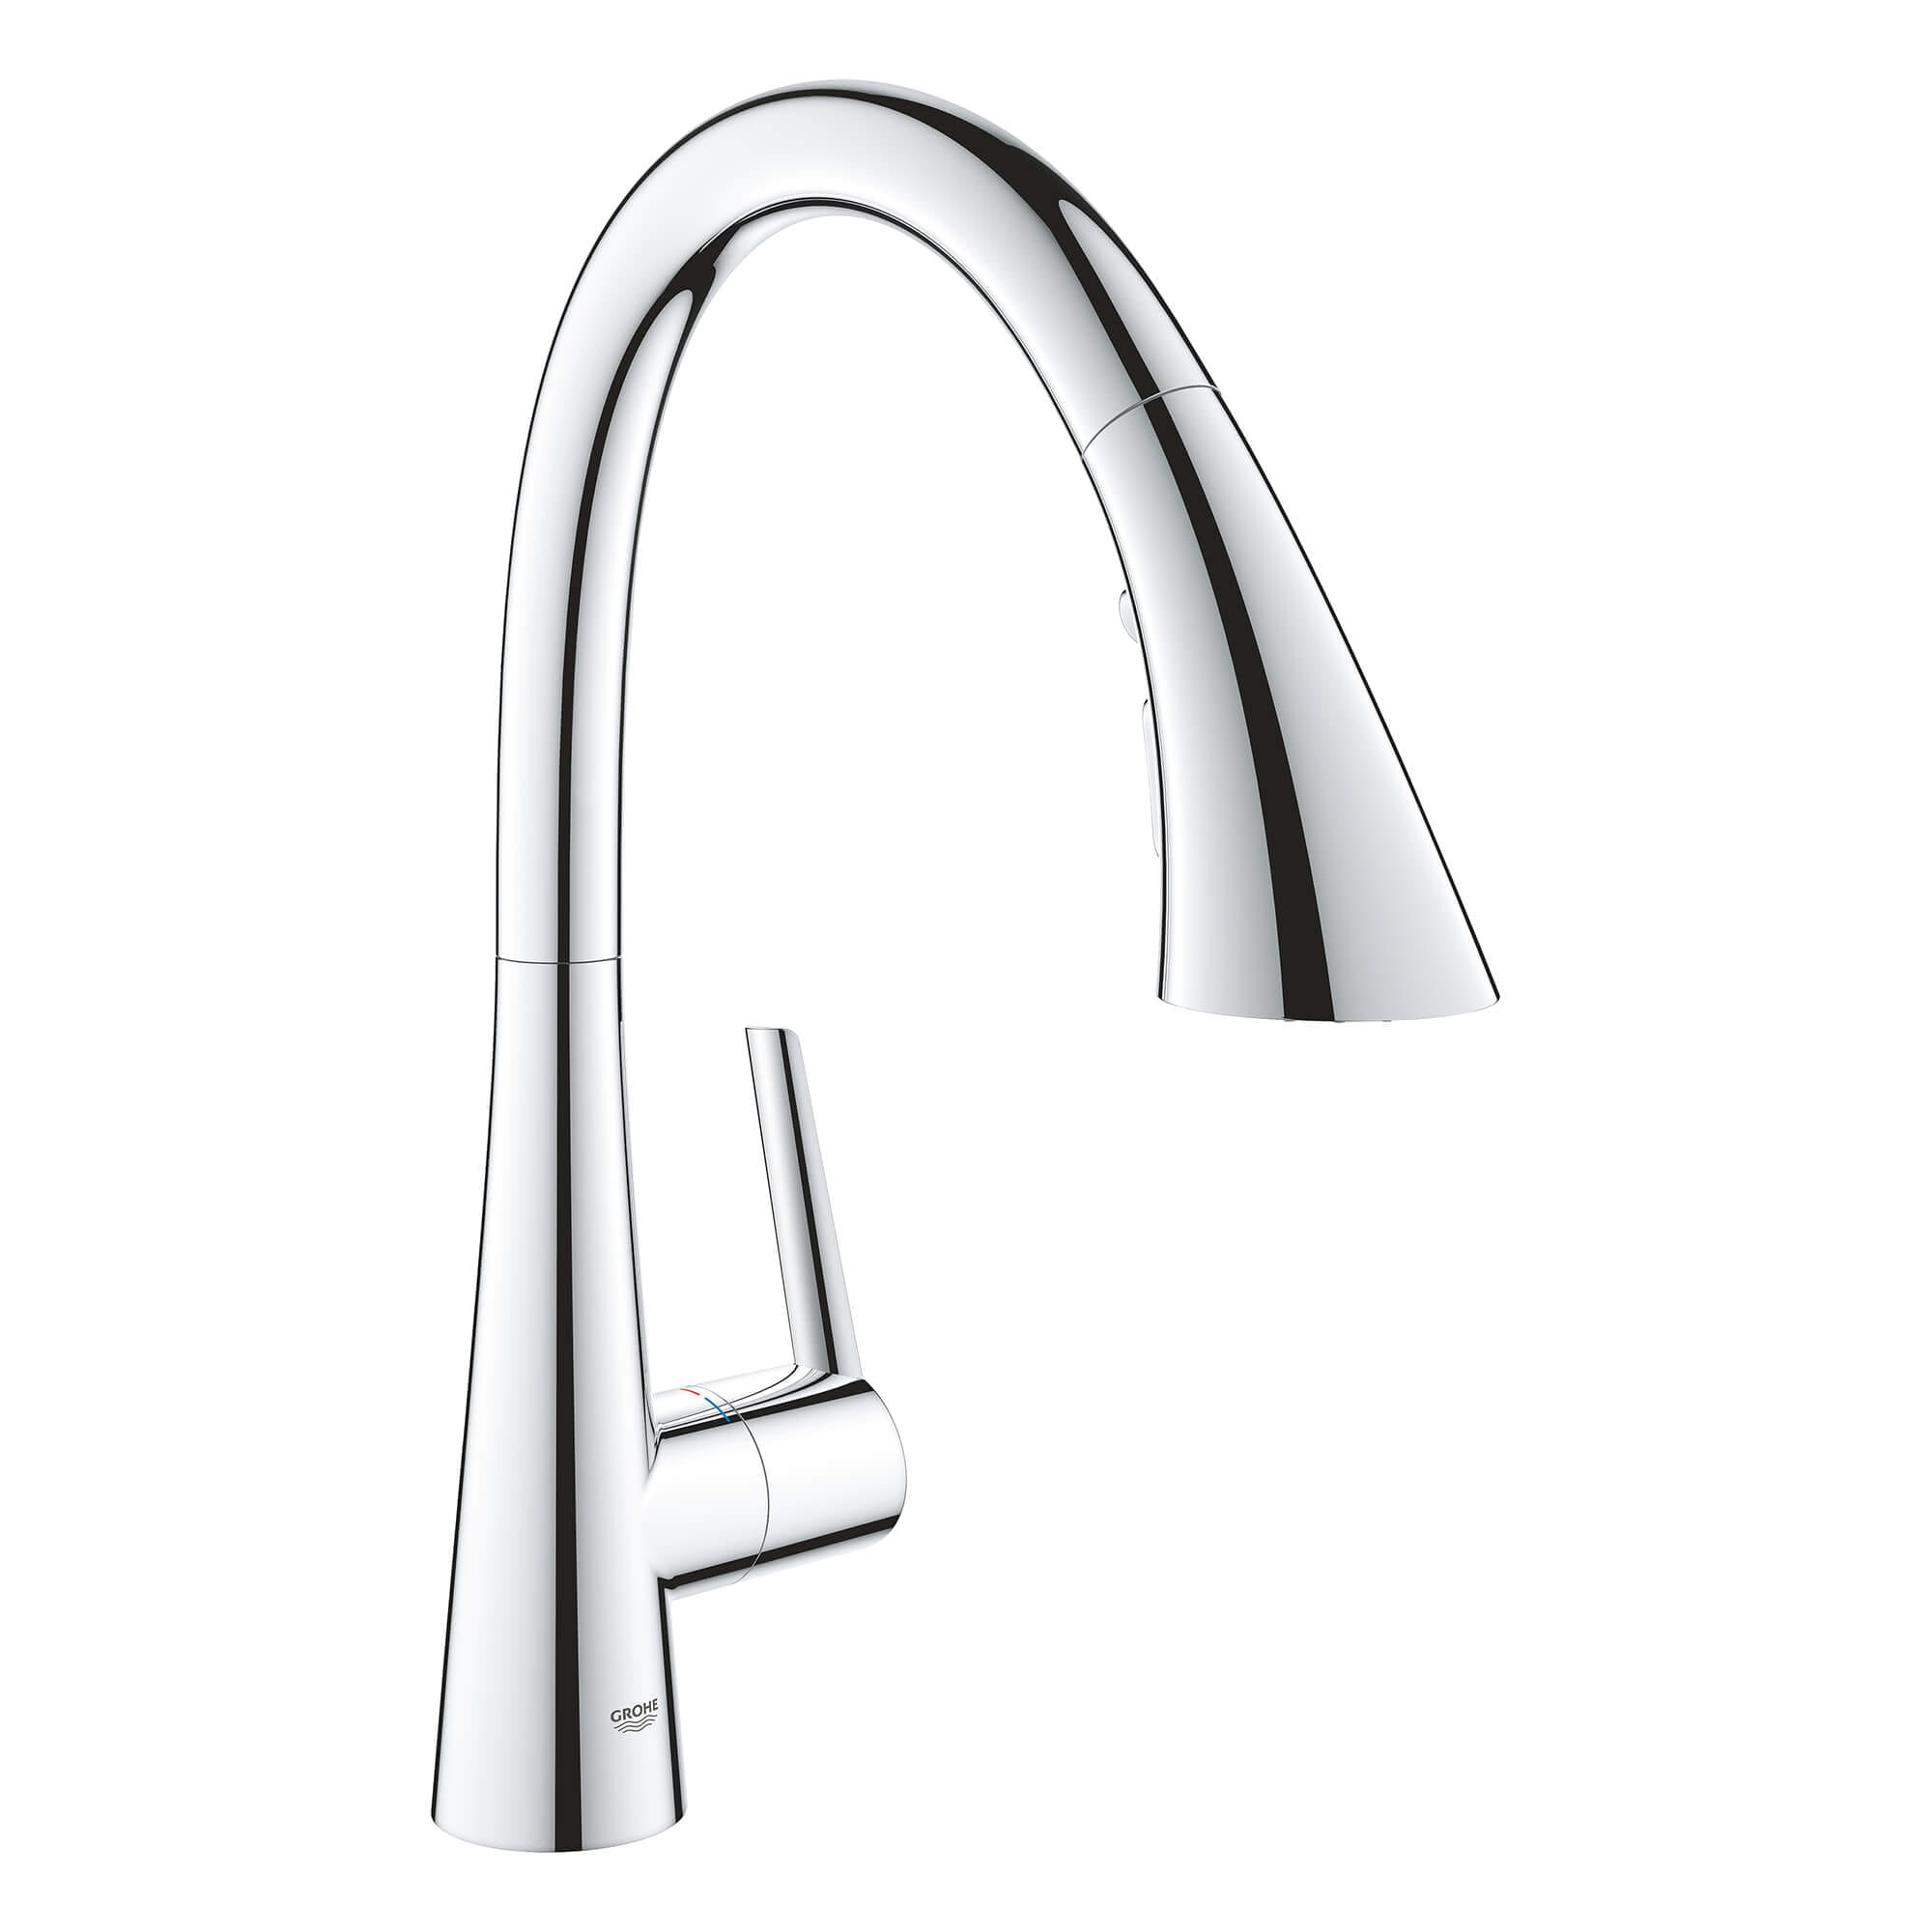 GROHE 32298 SINGLE HANDLE PULL DOWN KITCHEN FAUCET TRIPLE SPRAY 1.75 GPM